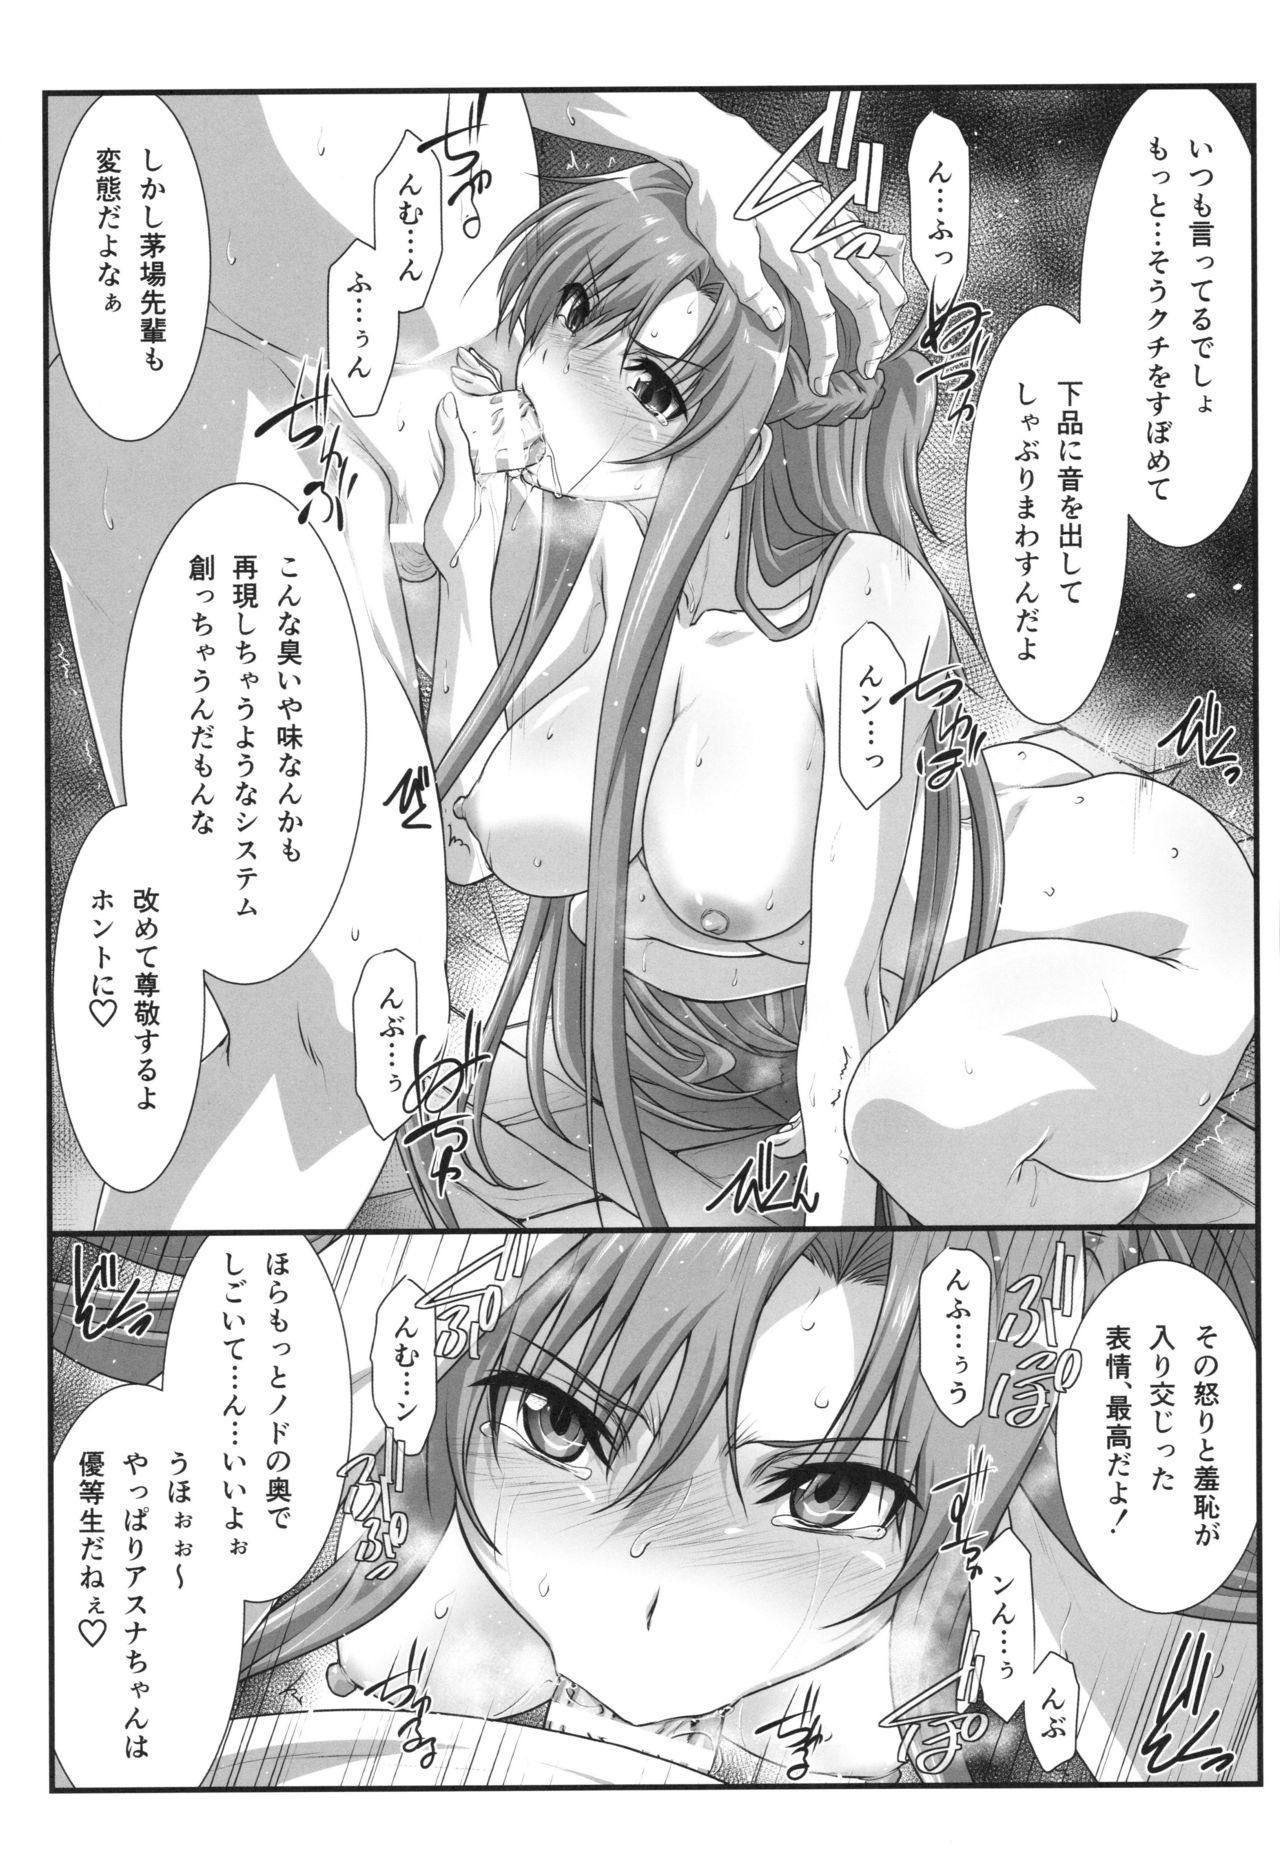 Dildo Astral Bout Ver. 41 - Sword art online Siririca - Page 6